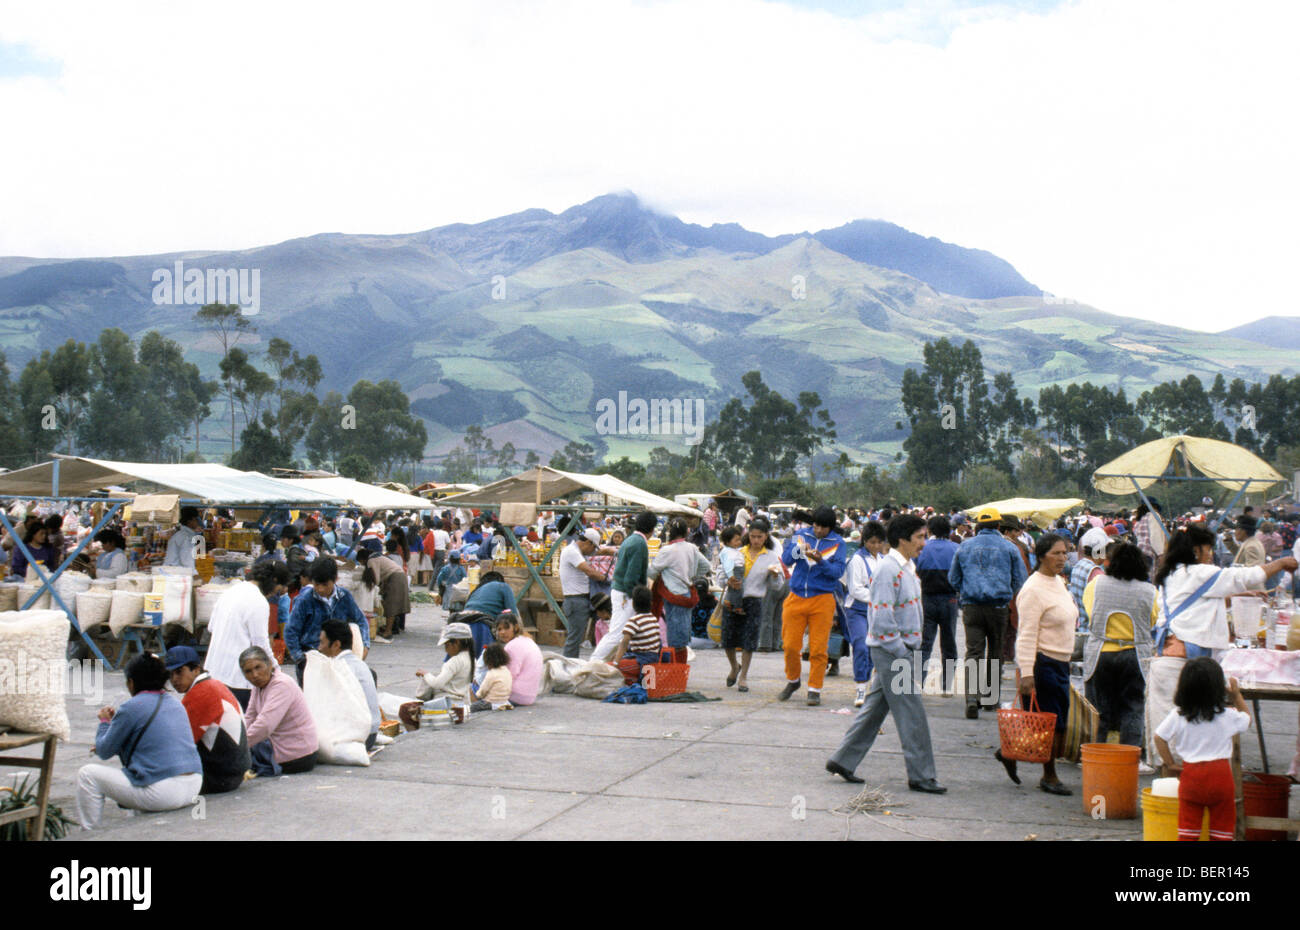 Market square in upland ecuador with large green patchwork coated mountain behind Stock Photo